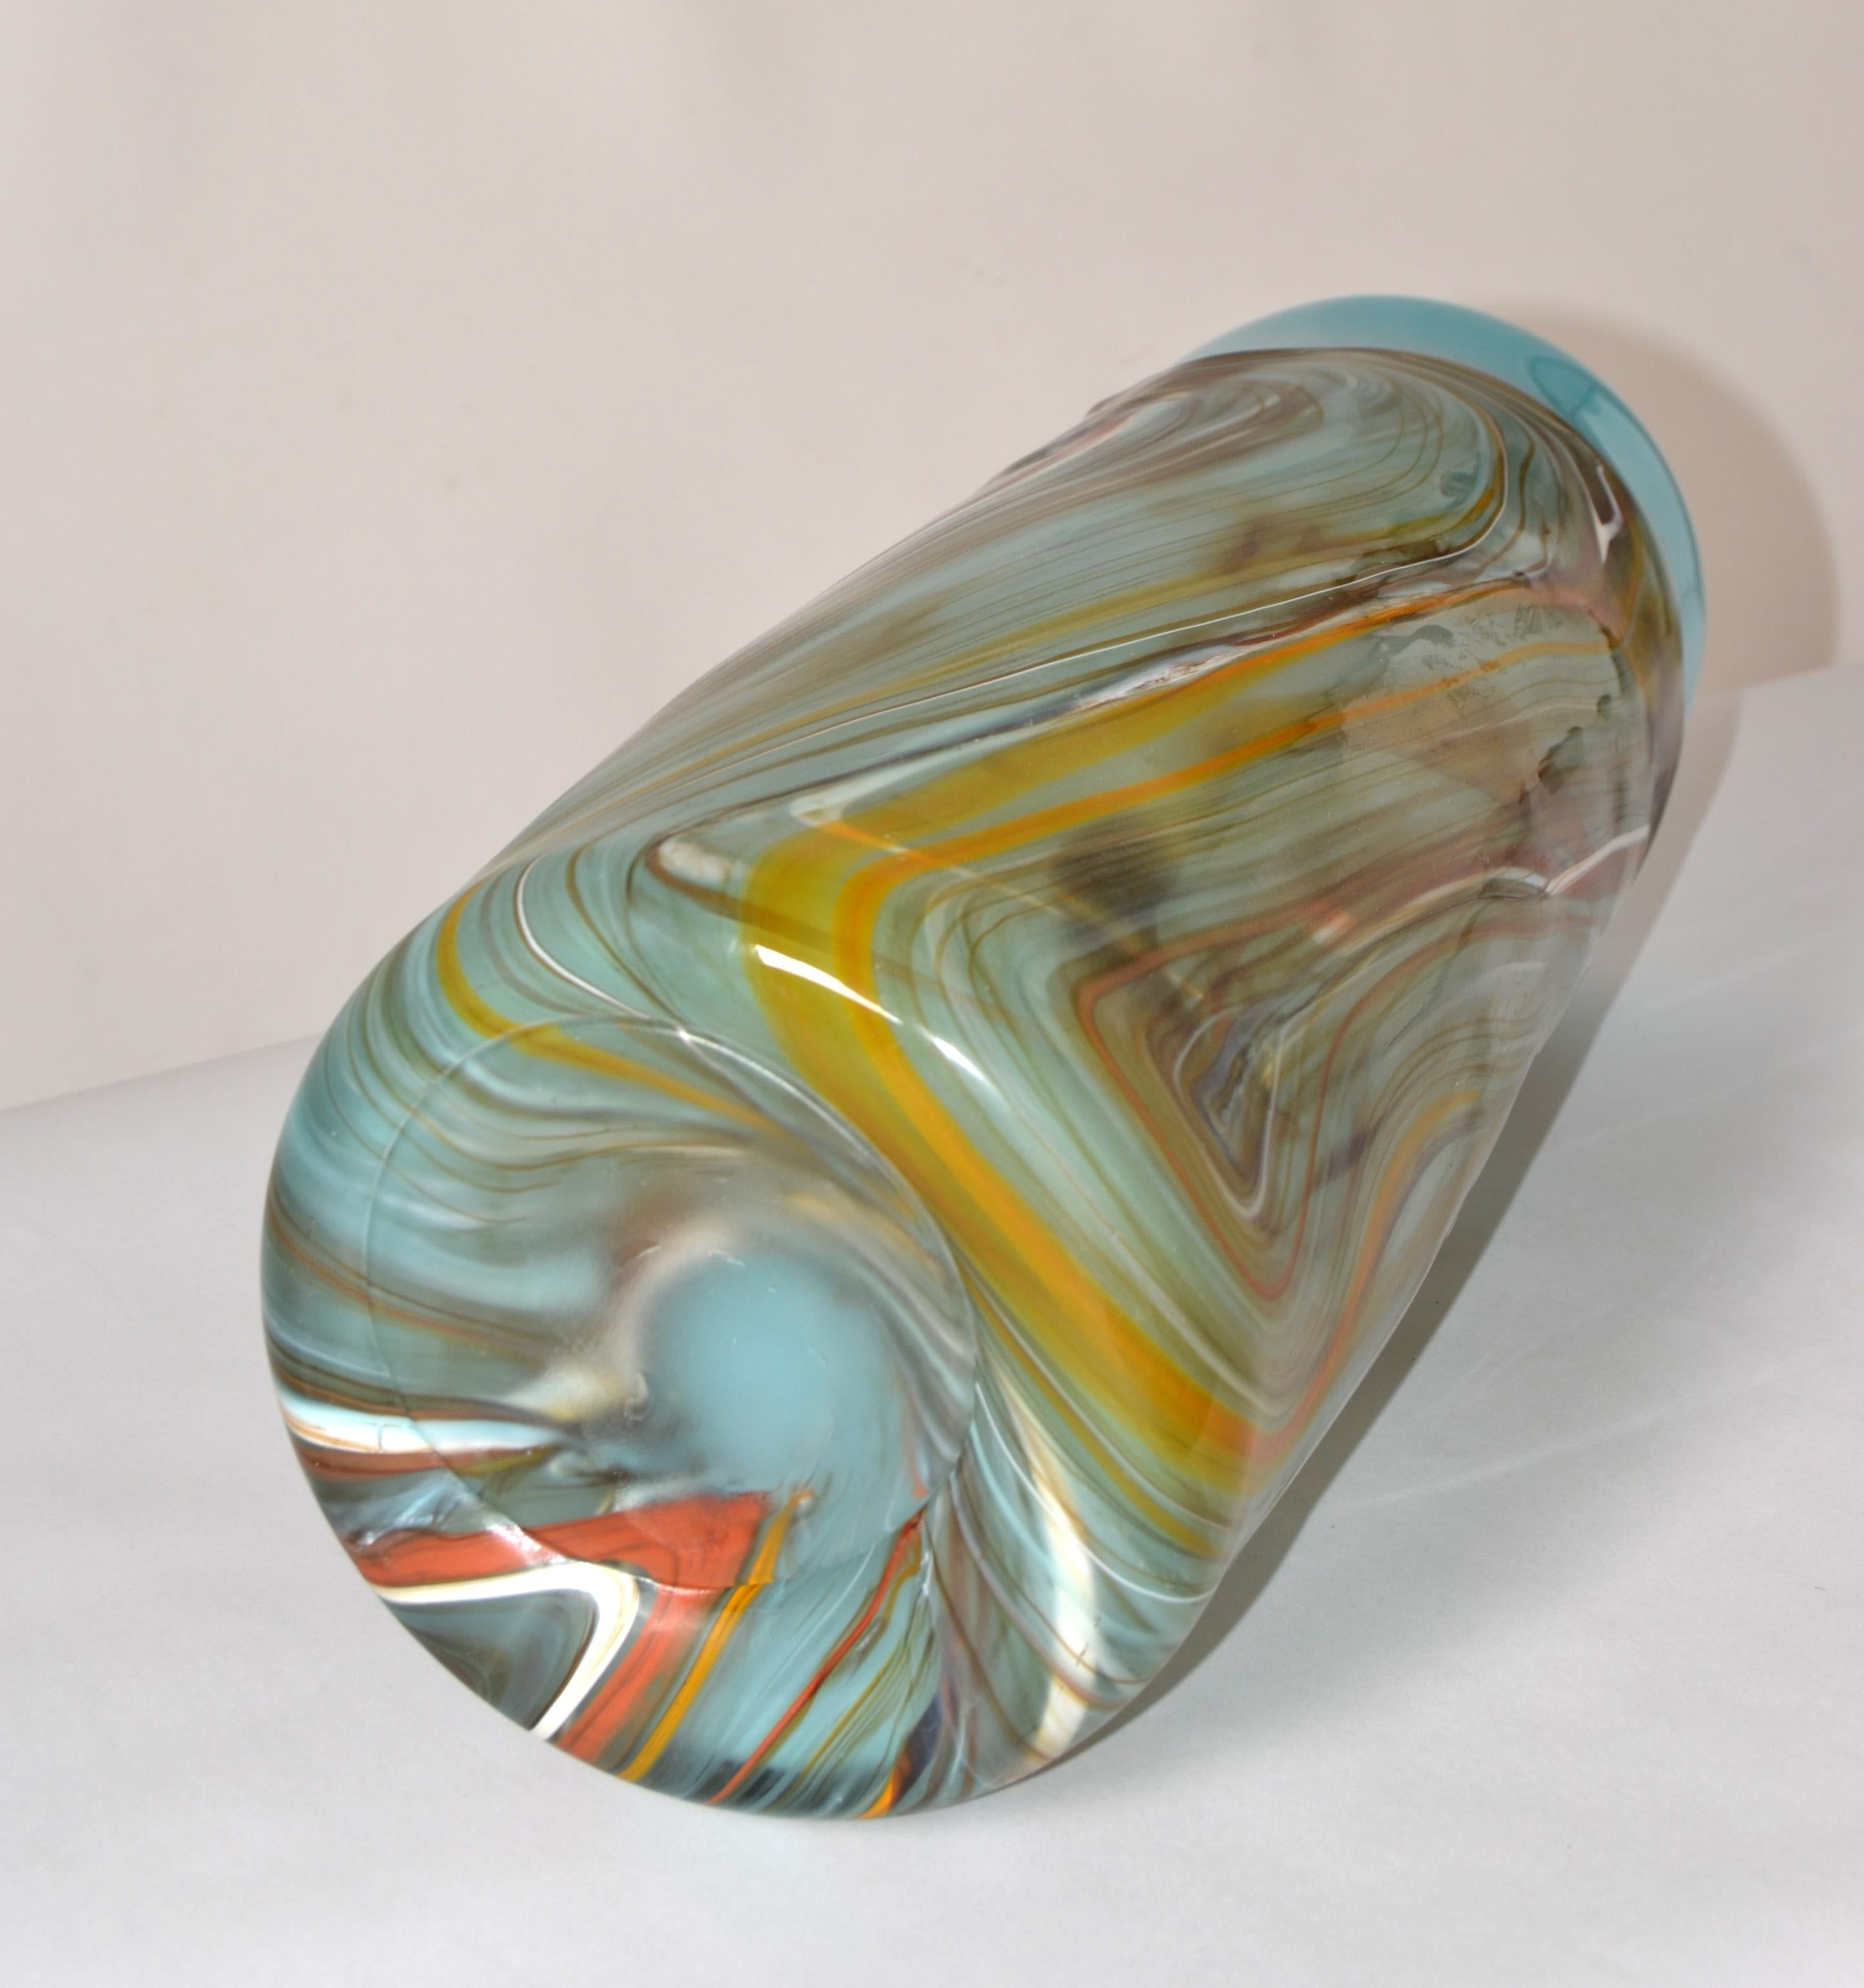 Late 20th Century Vintage Studio Art Blown Glass Heavy Vase Vessel Turquoise and Hues Brown 1975 For Sale